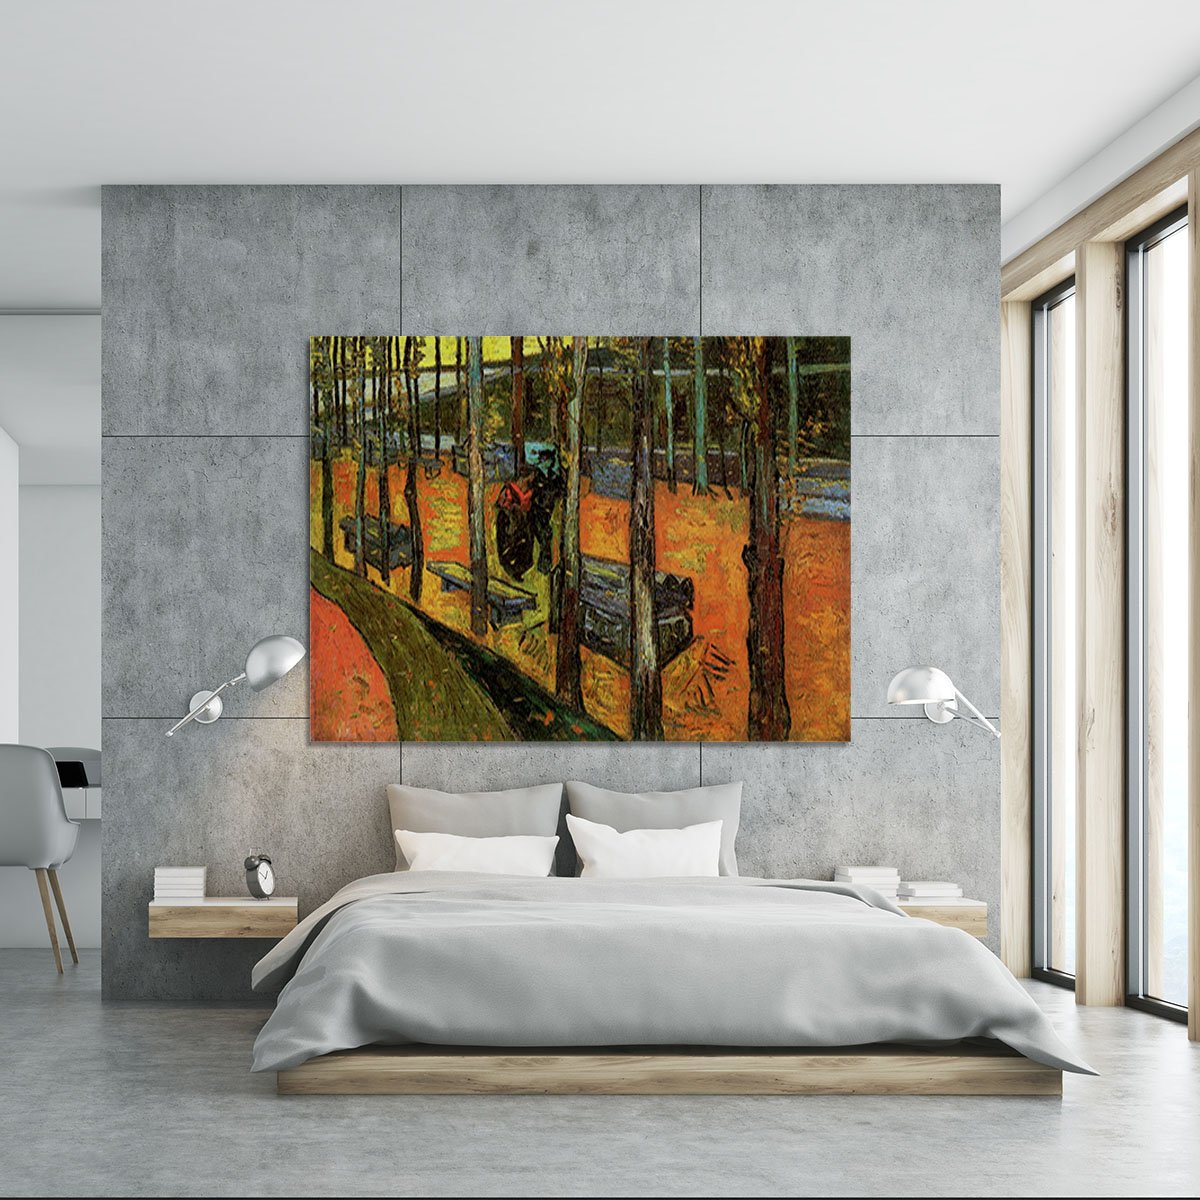 Les Alyscamps 2 by Van Gogh Canvas Print or Poster